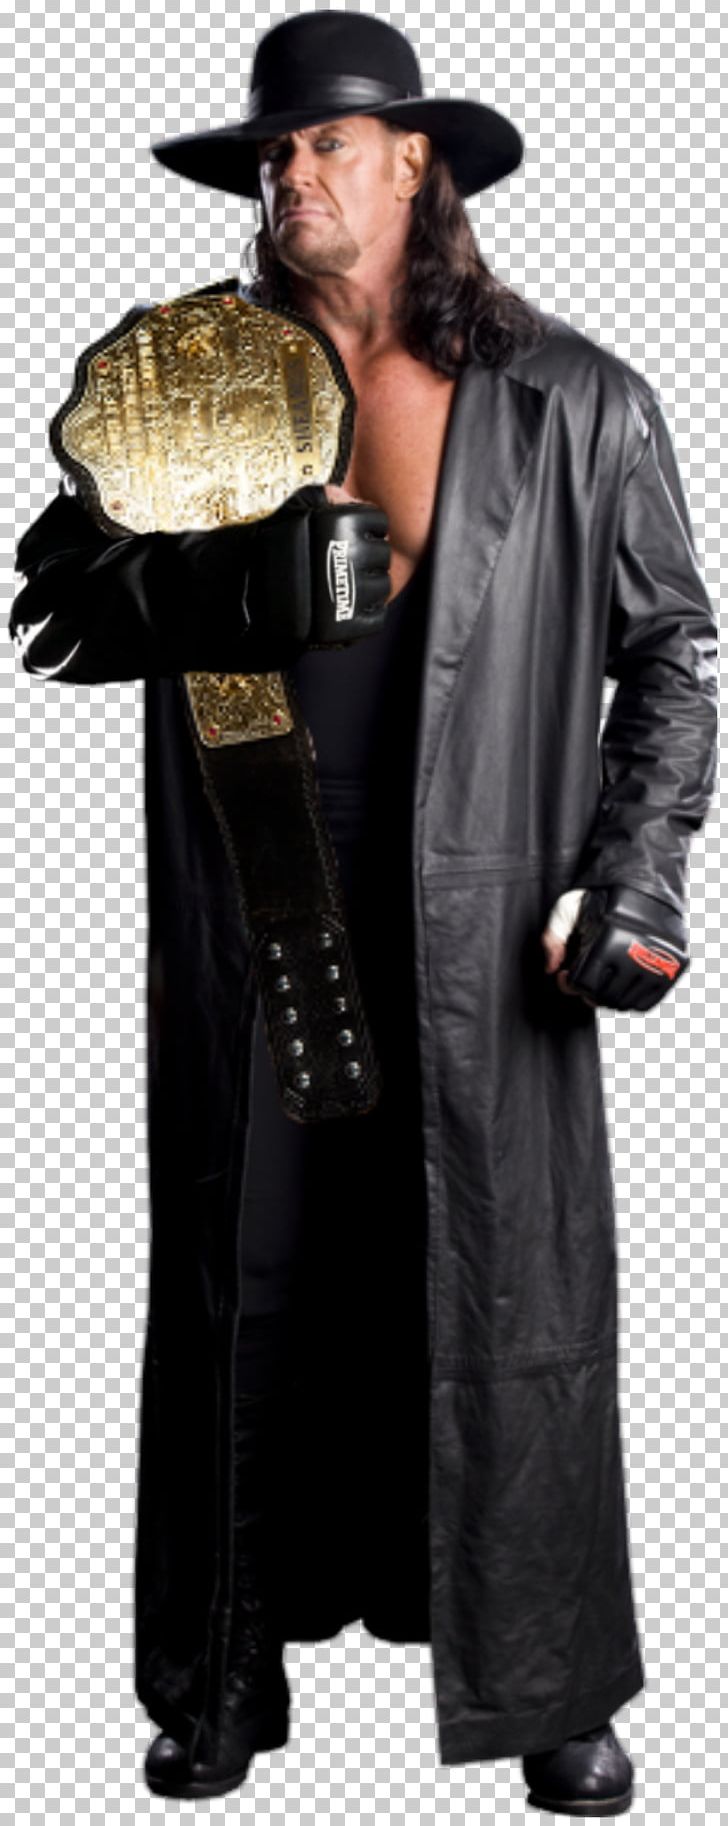 The Undertaker Leather Jacket Trench Coat Clothing PNG, Clipart, Clothing, Clothing Sizes, Coat, Costume, Dress Free PNG Download